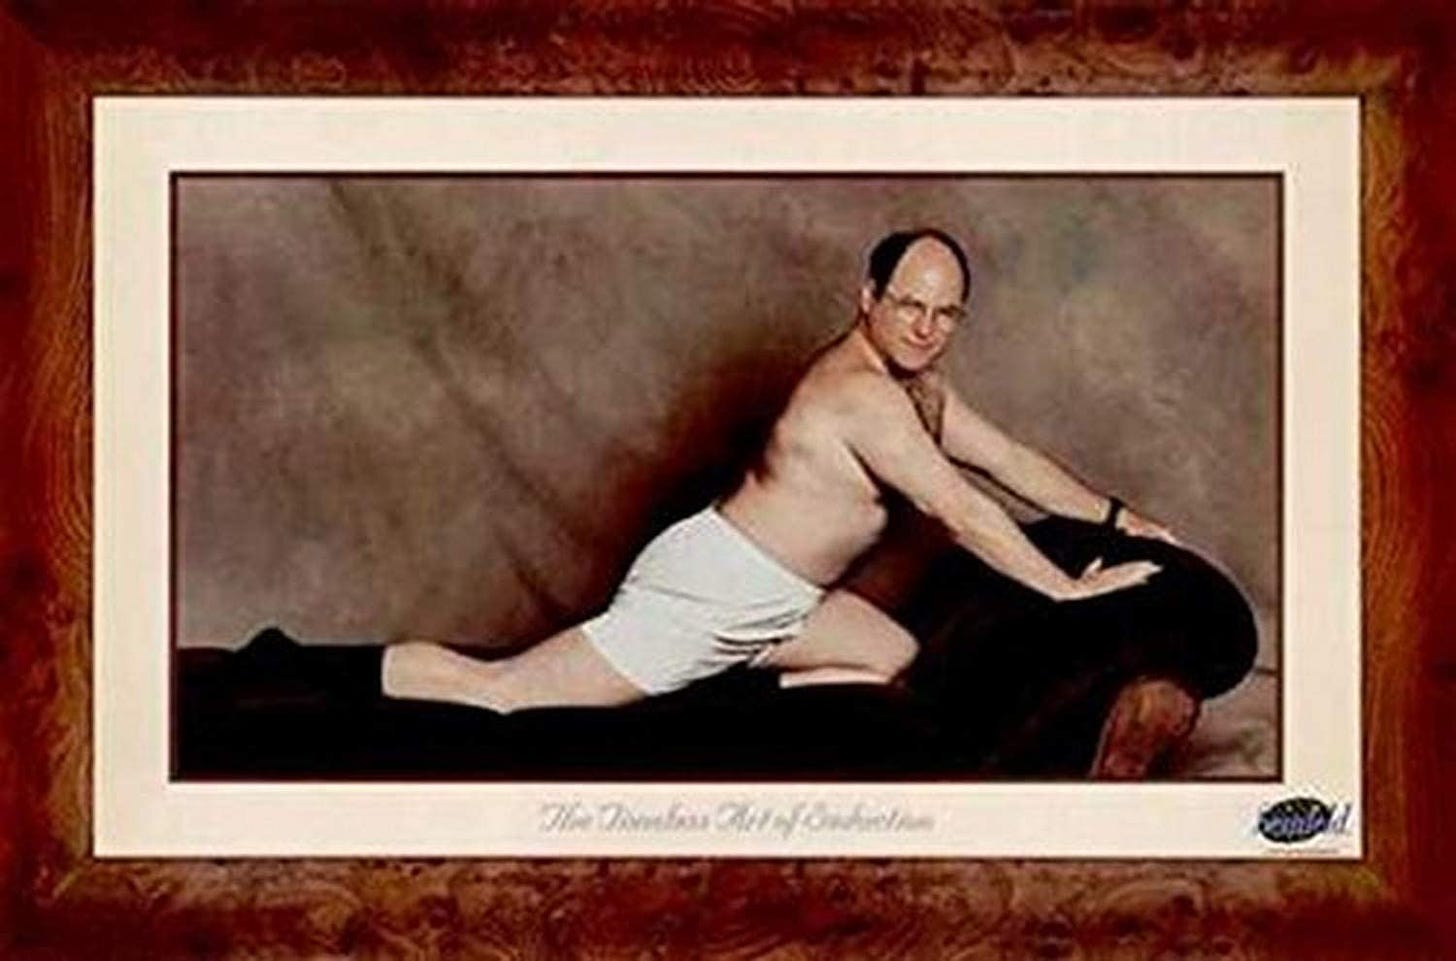 Amazon.com: Buyartforless George Costanza (The Timeless Art of Seduction) -  Seinfeld TV Show 36x24 Art Print Poster Wall Decor Humor Famous Photo Pop  Culture: Posters &amp; Prints